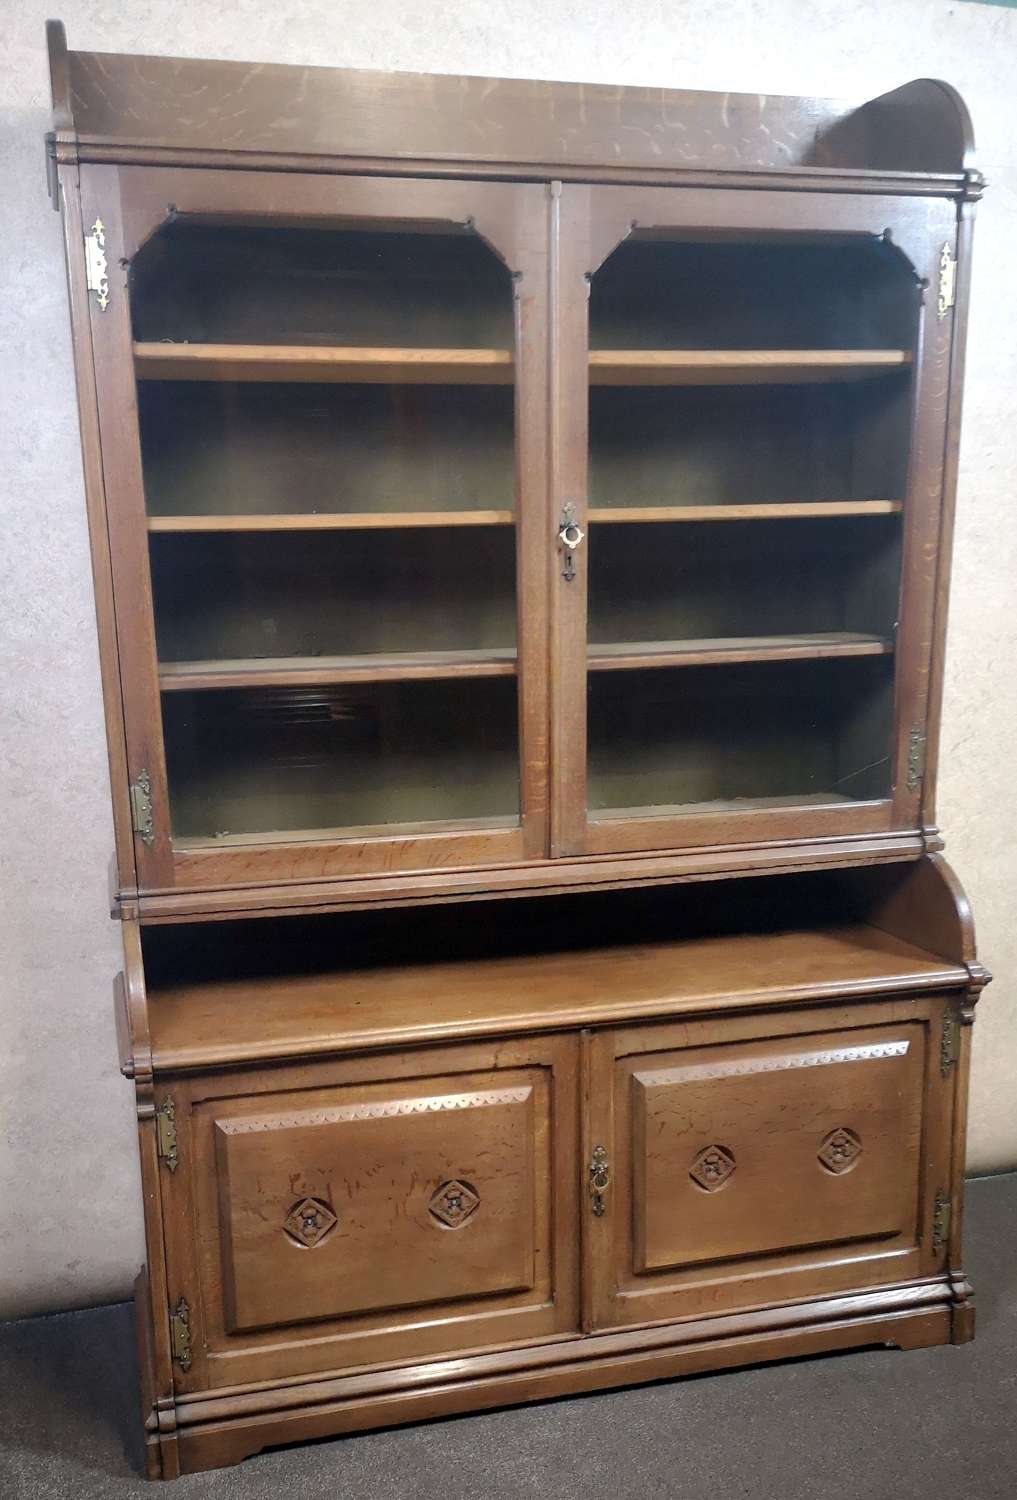 OAK ARTS AND CRAFTS BOOKCASE IN THE GOTHIC STYLE